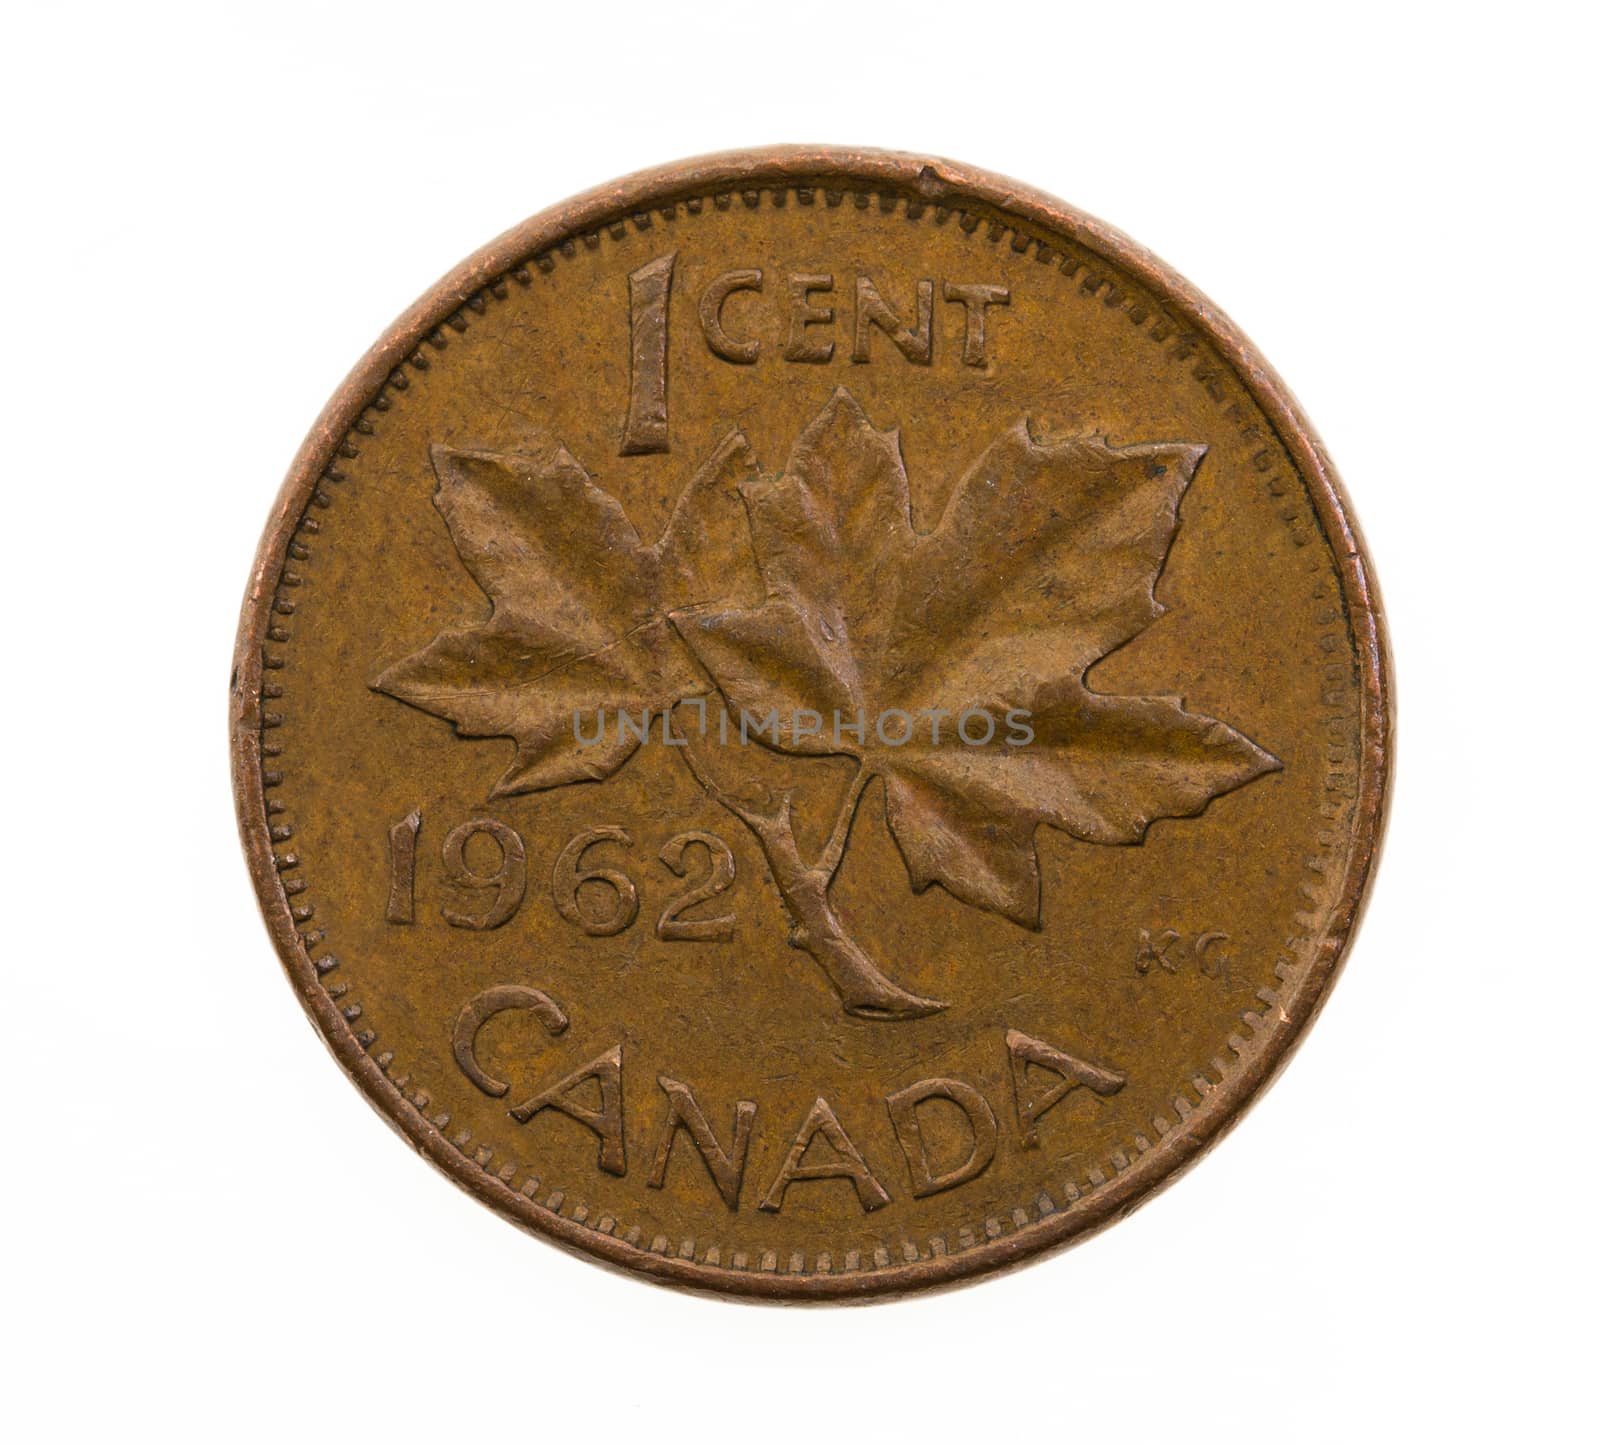 one Canadian cent, isolated on white background